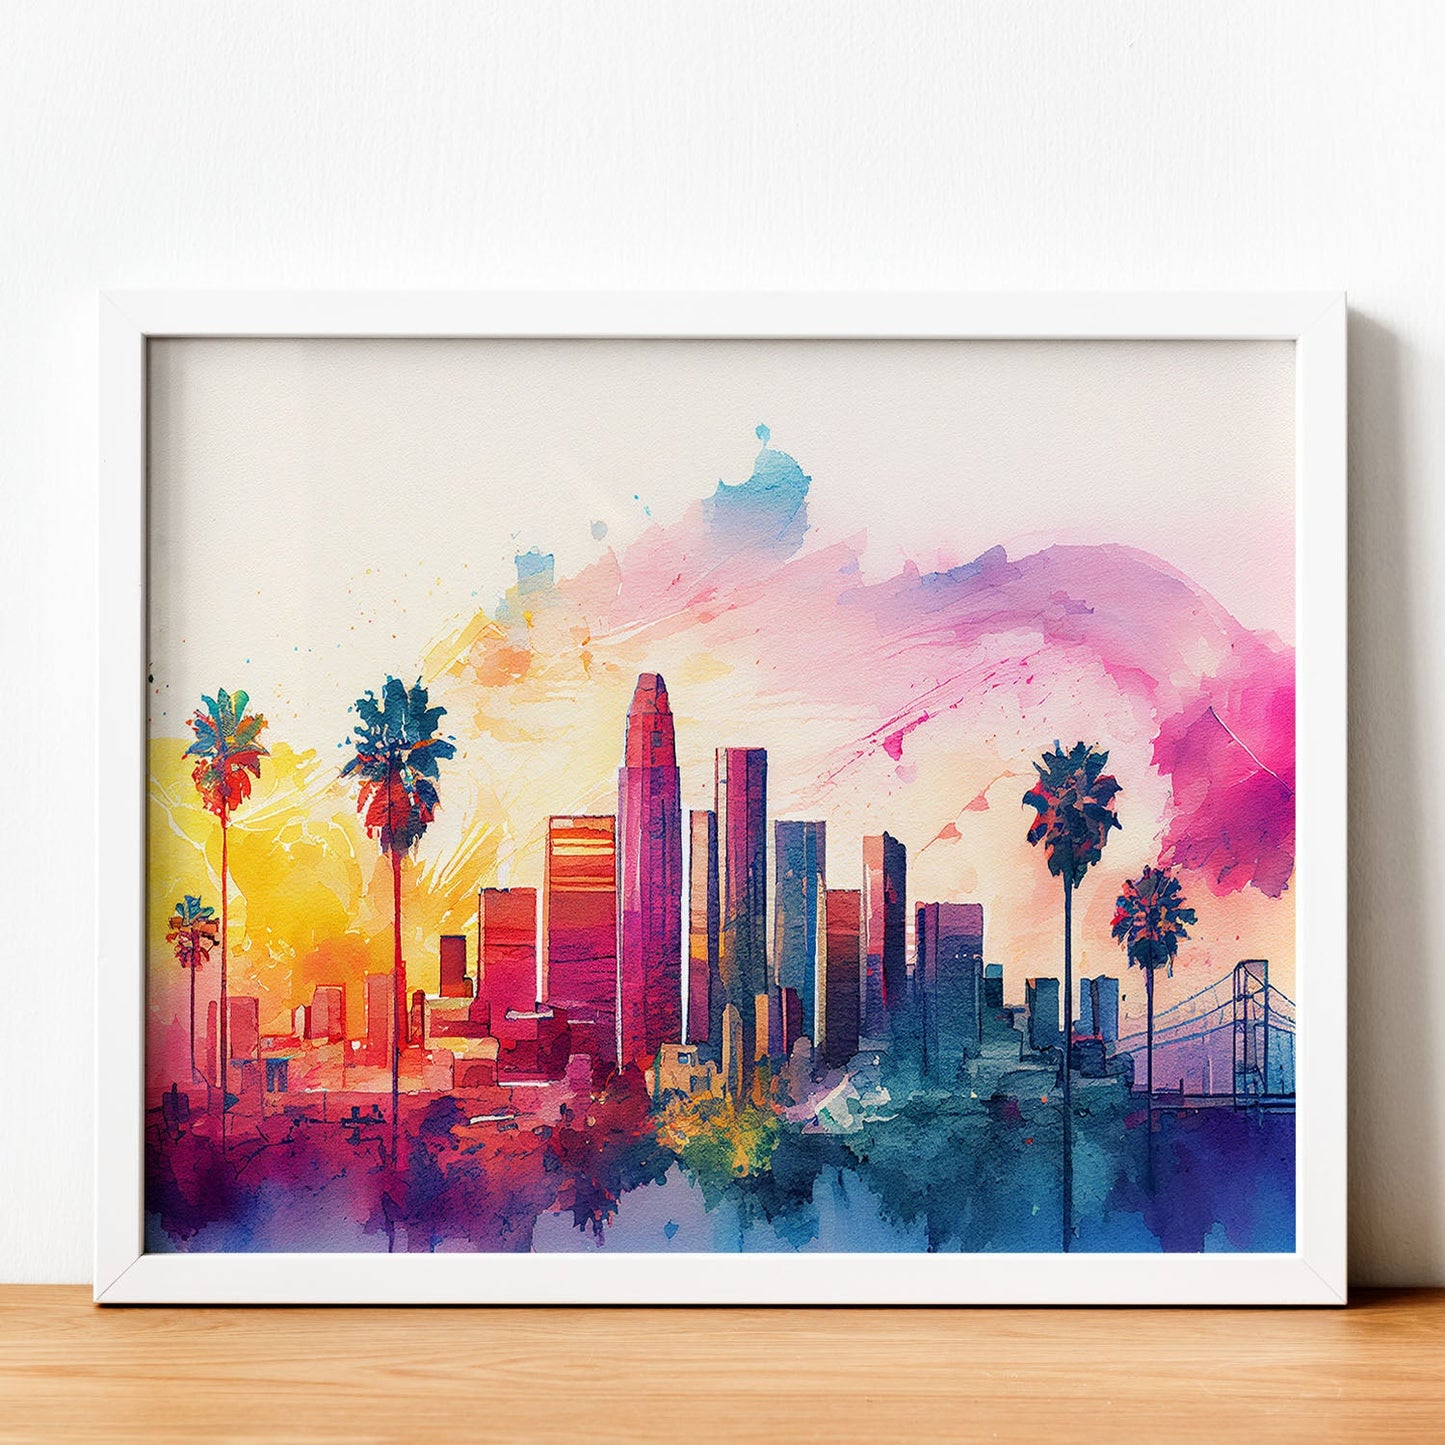 Nacnic watercolor of a skyline of the city of Los Angeles_3. Aesthetic Wall Art Prints for Bedroom or Living Room Design.-Artwork-Nacnic-A4-Sin Marco-Nacnic Estudio SL